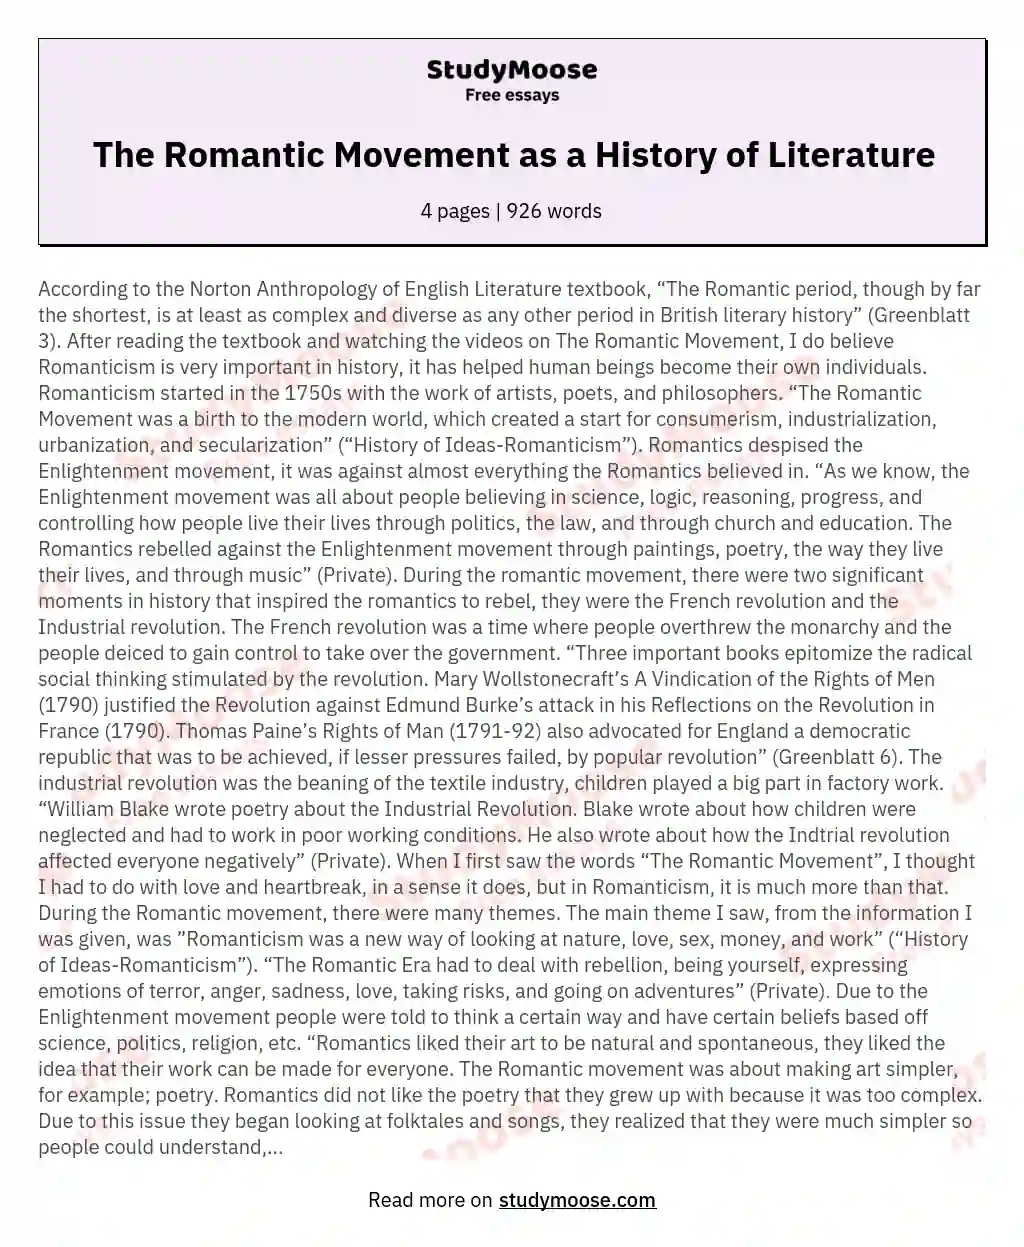 The Romantic Movement as a History of Literature essay